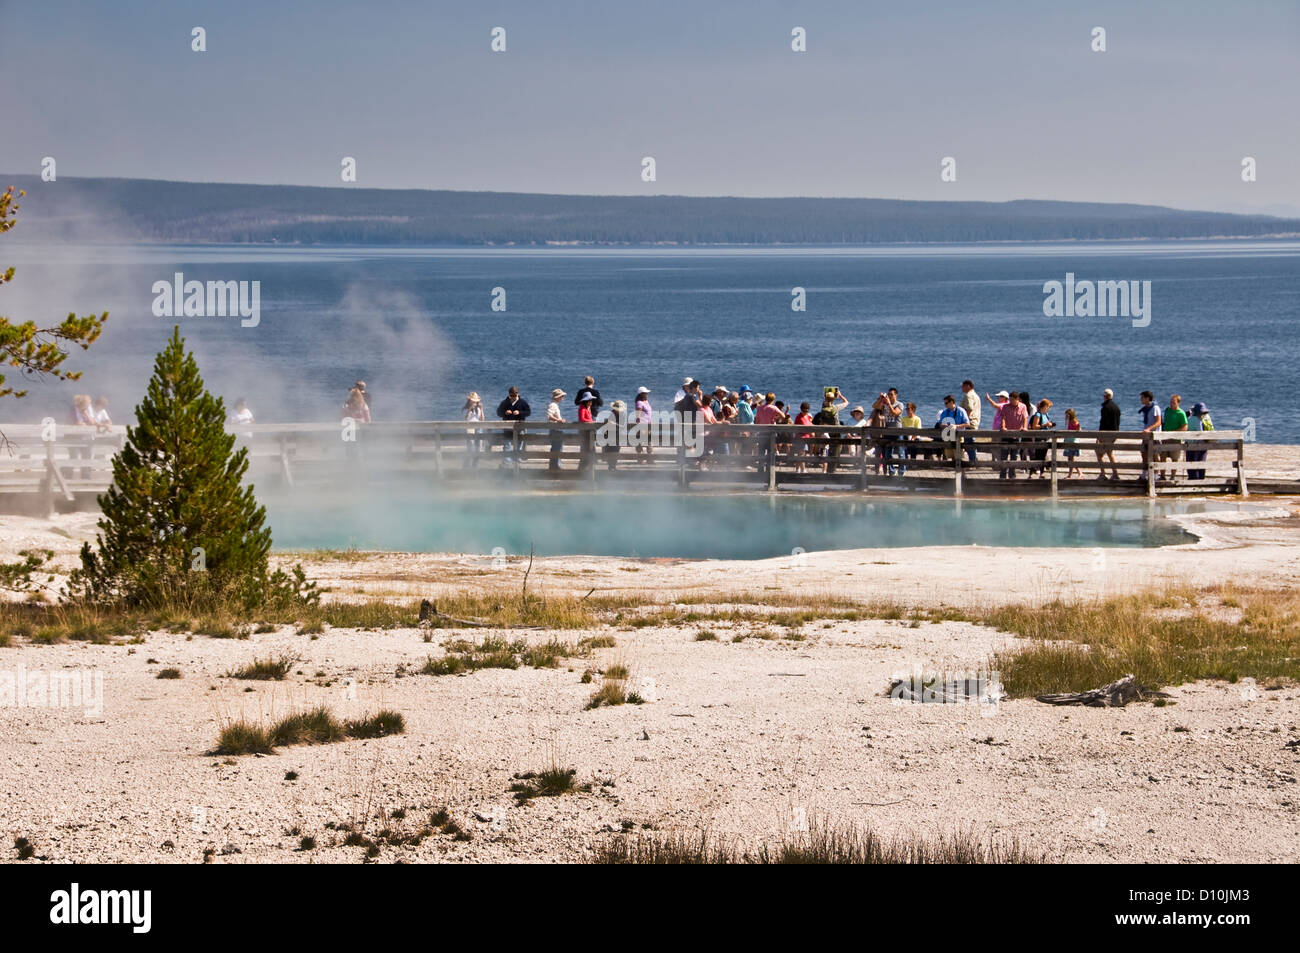 Tourists observing a steaming hot spring - West thumb geyser basin, Yellowstone Lake, Yellowstone national Park - Wyoming, USA Stock Photo